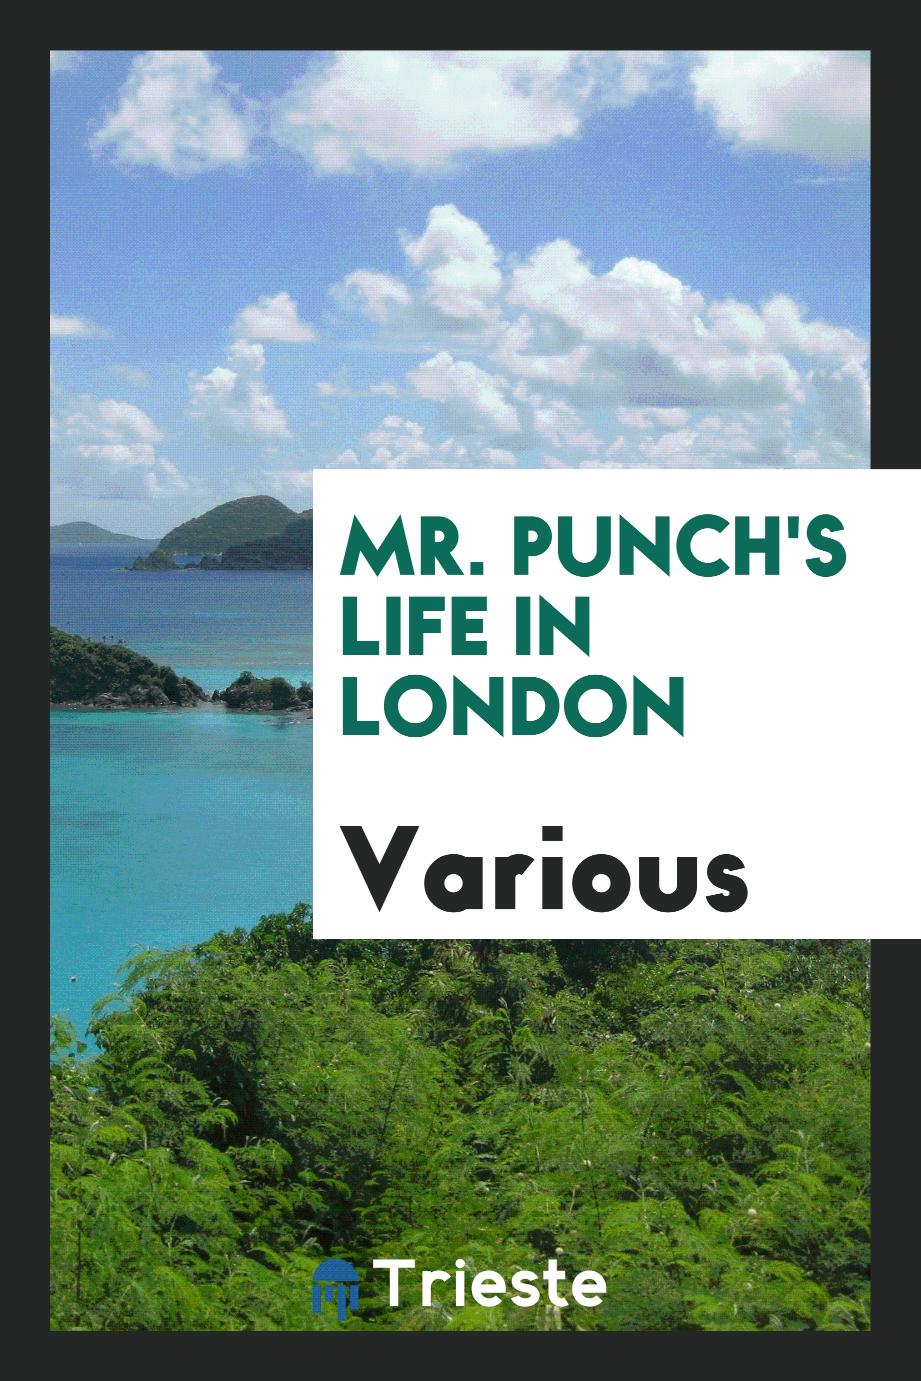 Mr. Punch's life in London